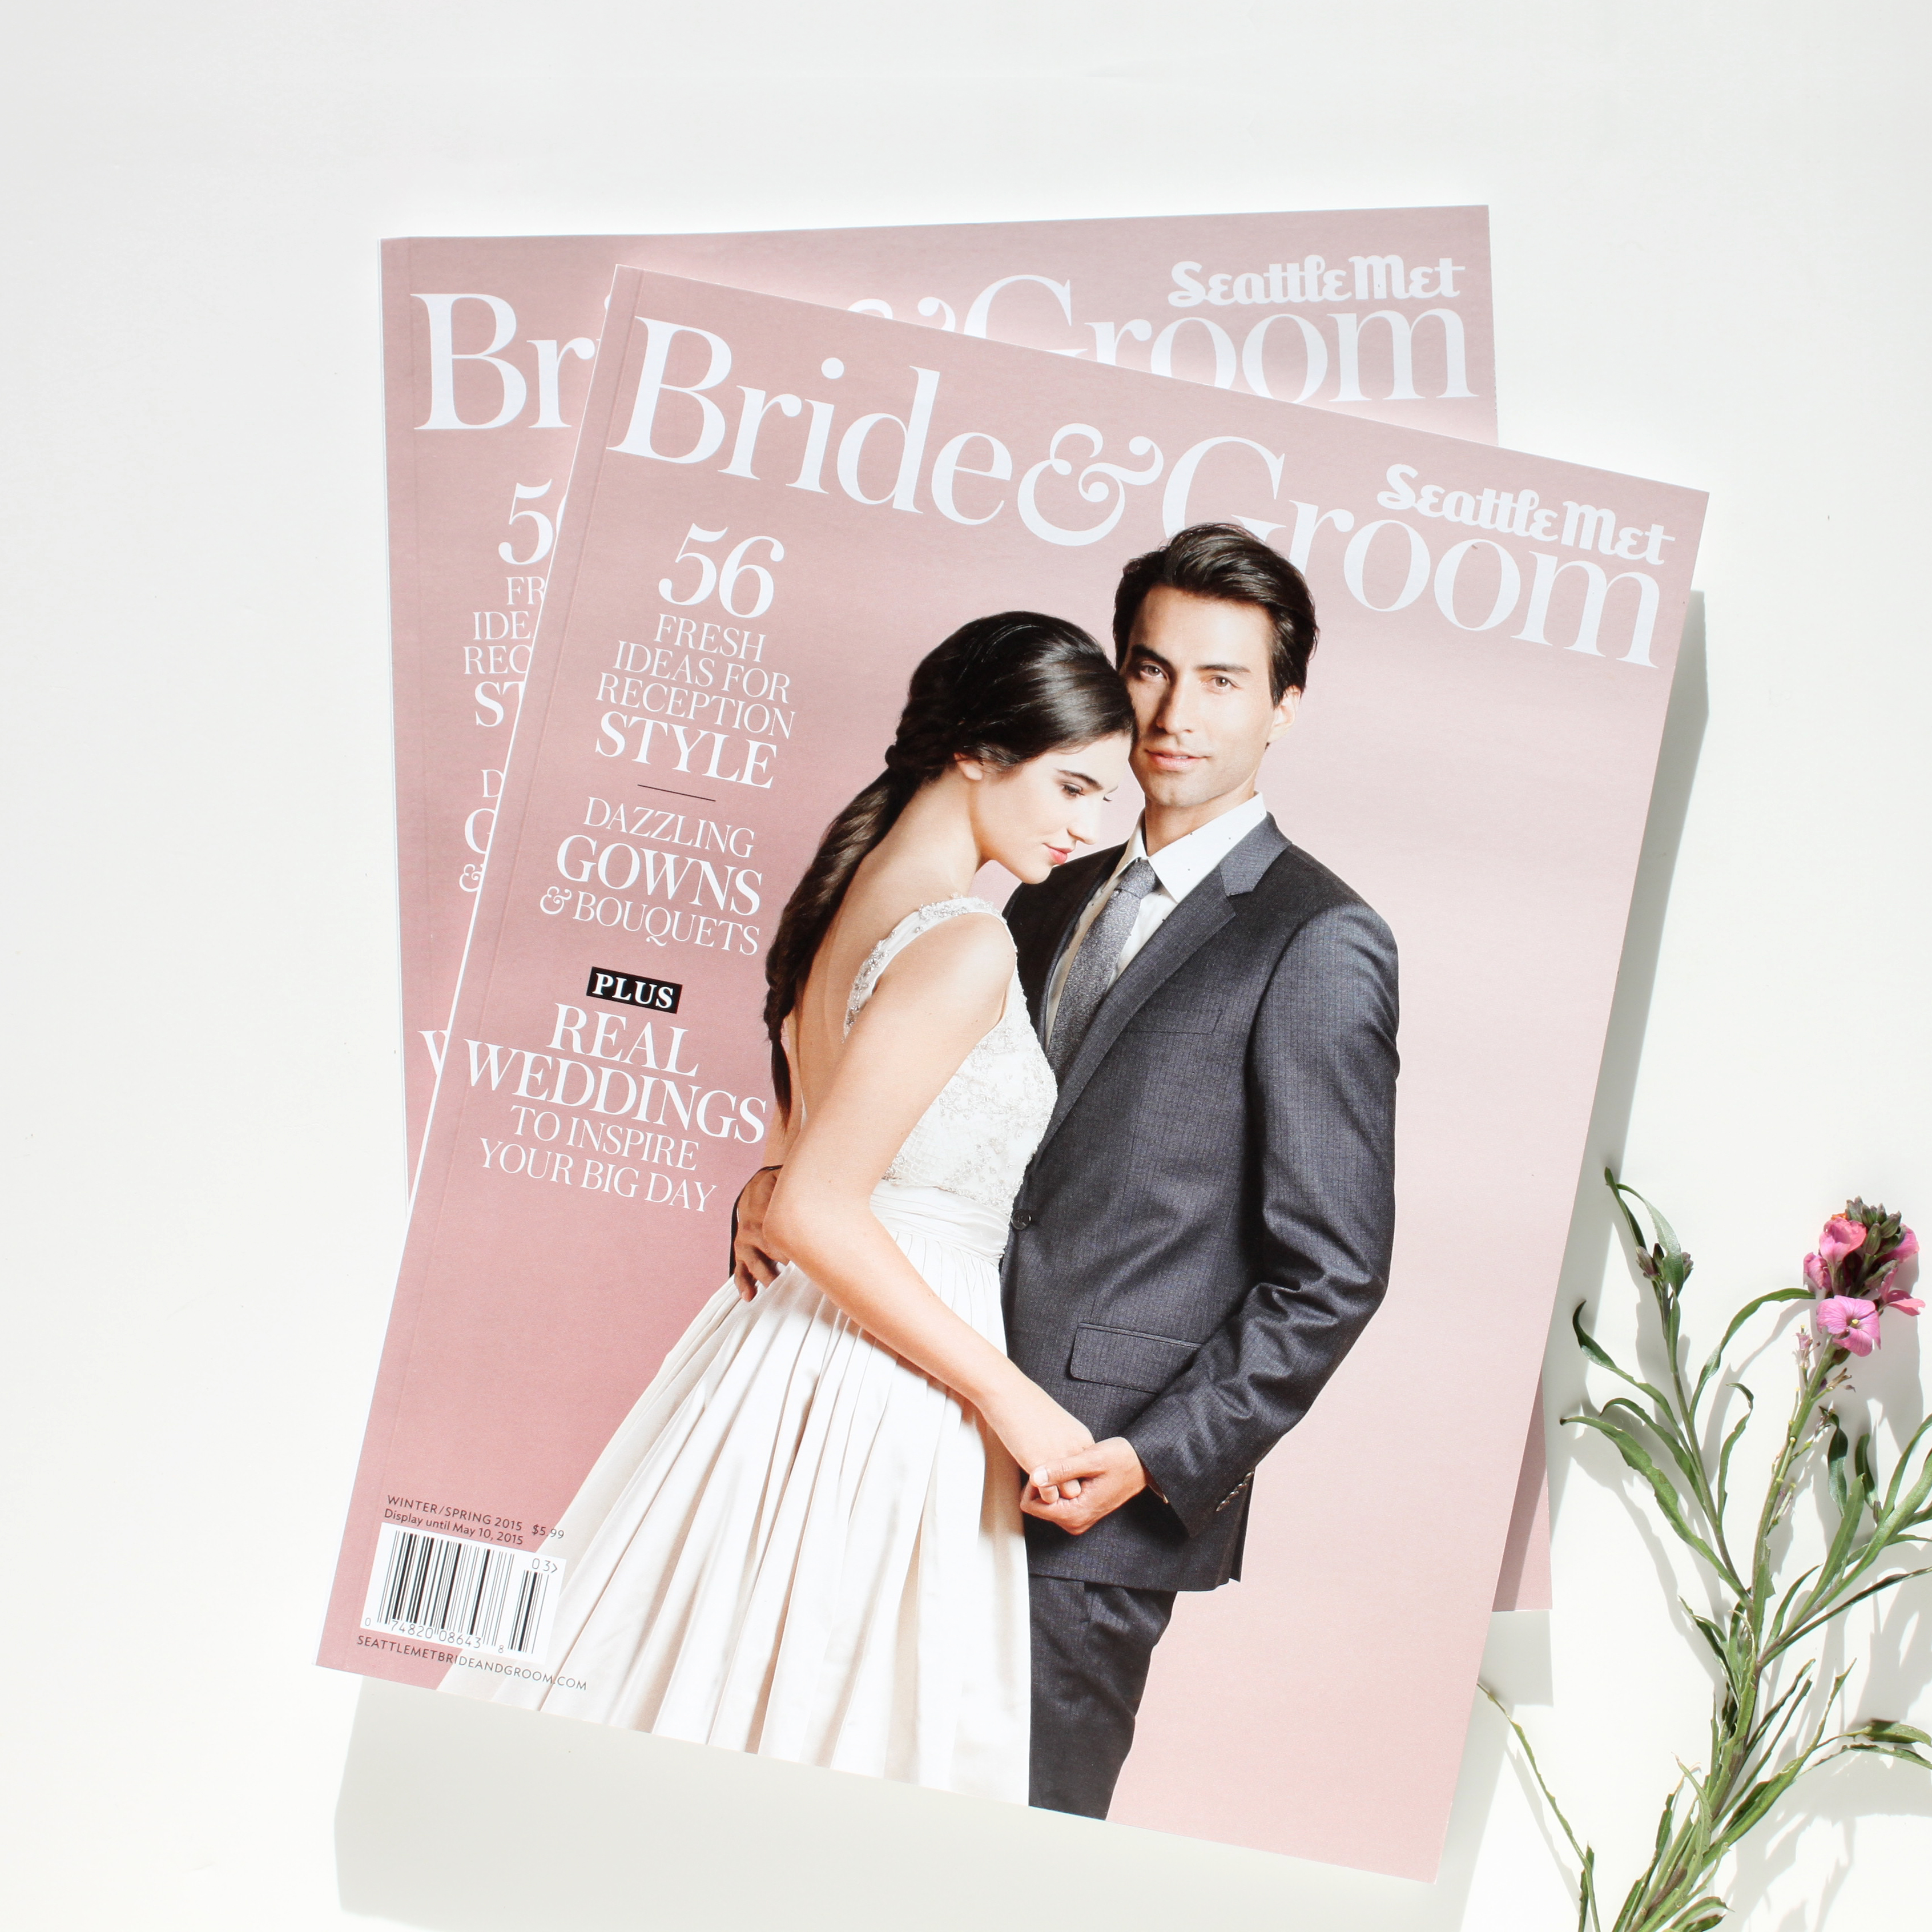 Kendal & Jim's wedding featured in Seattle Met Bride and Groom magazine. | Florals by Finch & Thistle Event Design | Photography by Catherine Abegg | Stationery by Iwona Konarski